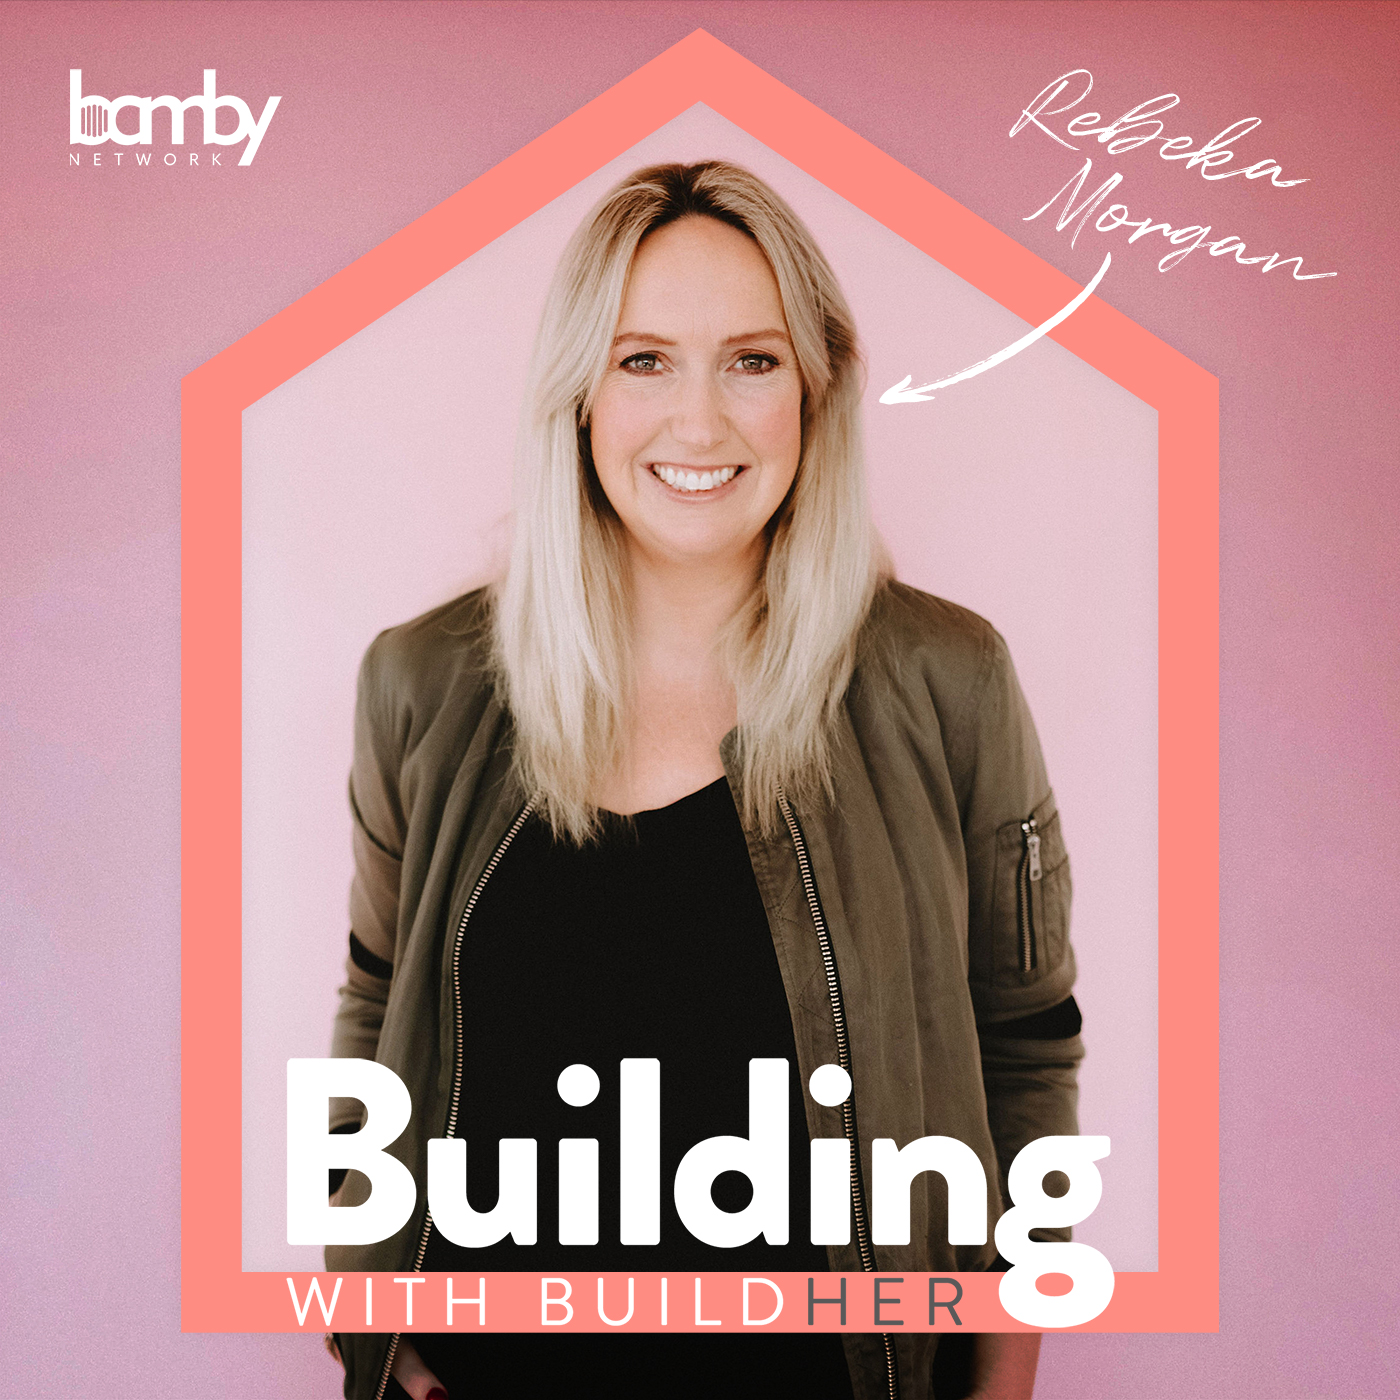 A BuildHer Building Tale with Suzzanne McConchie - She Built a House in 4 Days!